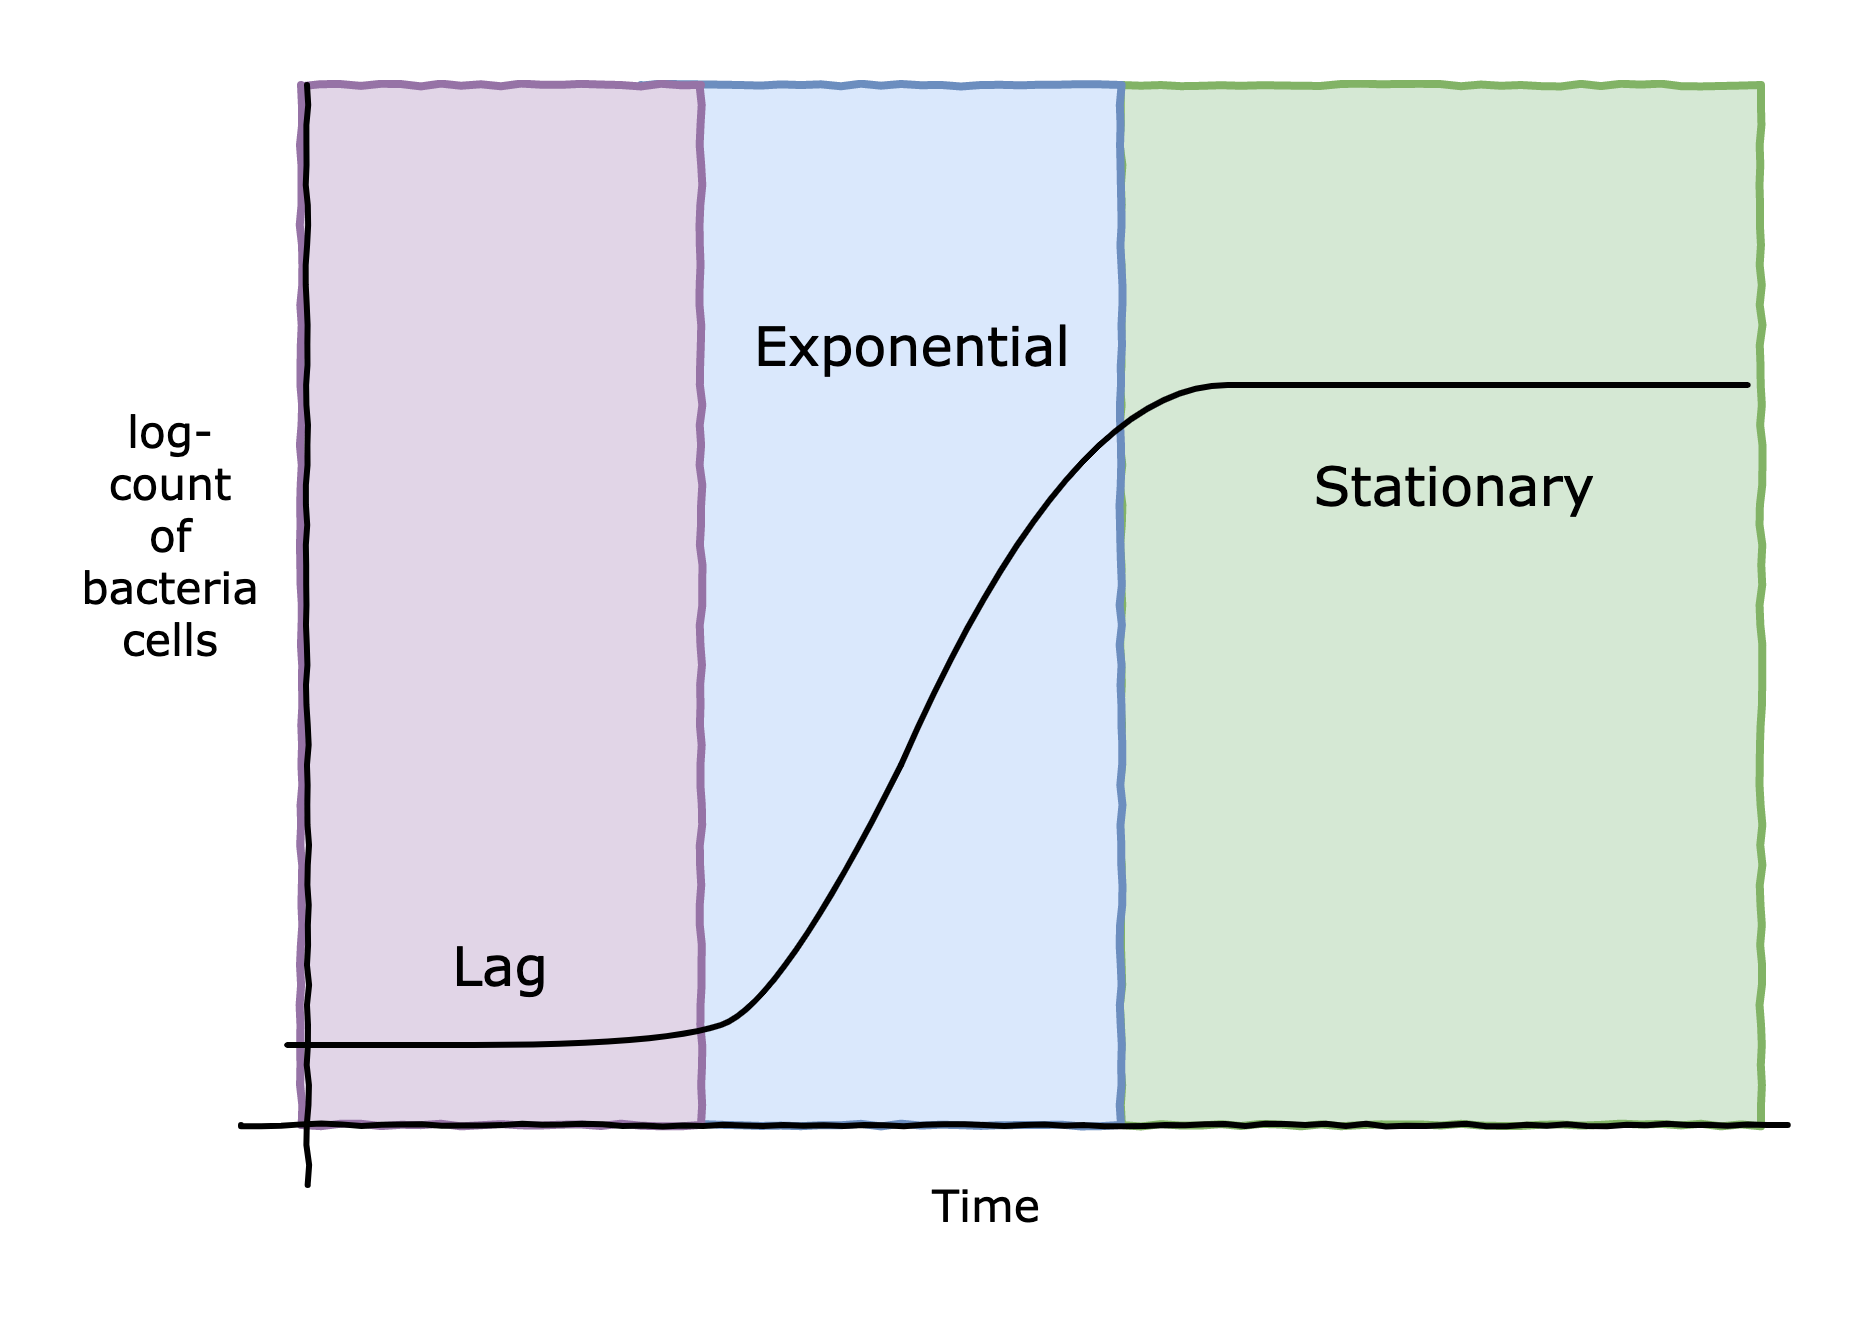 growth phase bacteria lag log exponential stationary